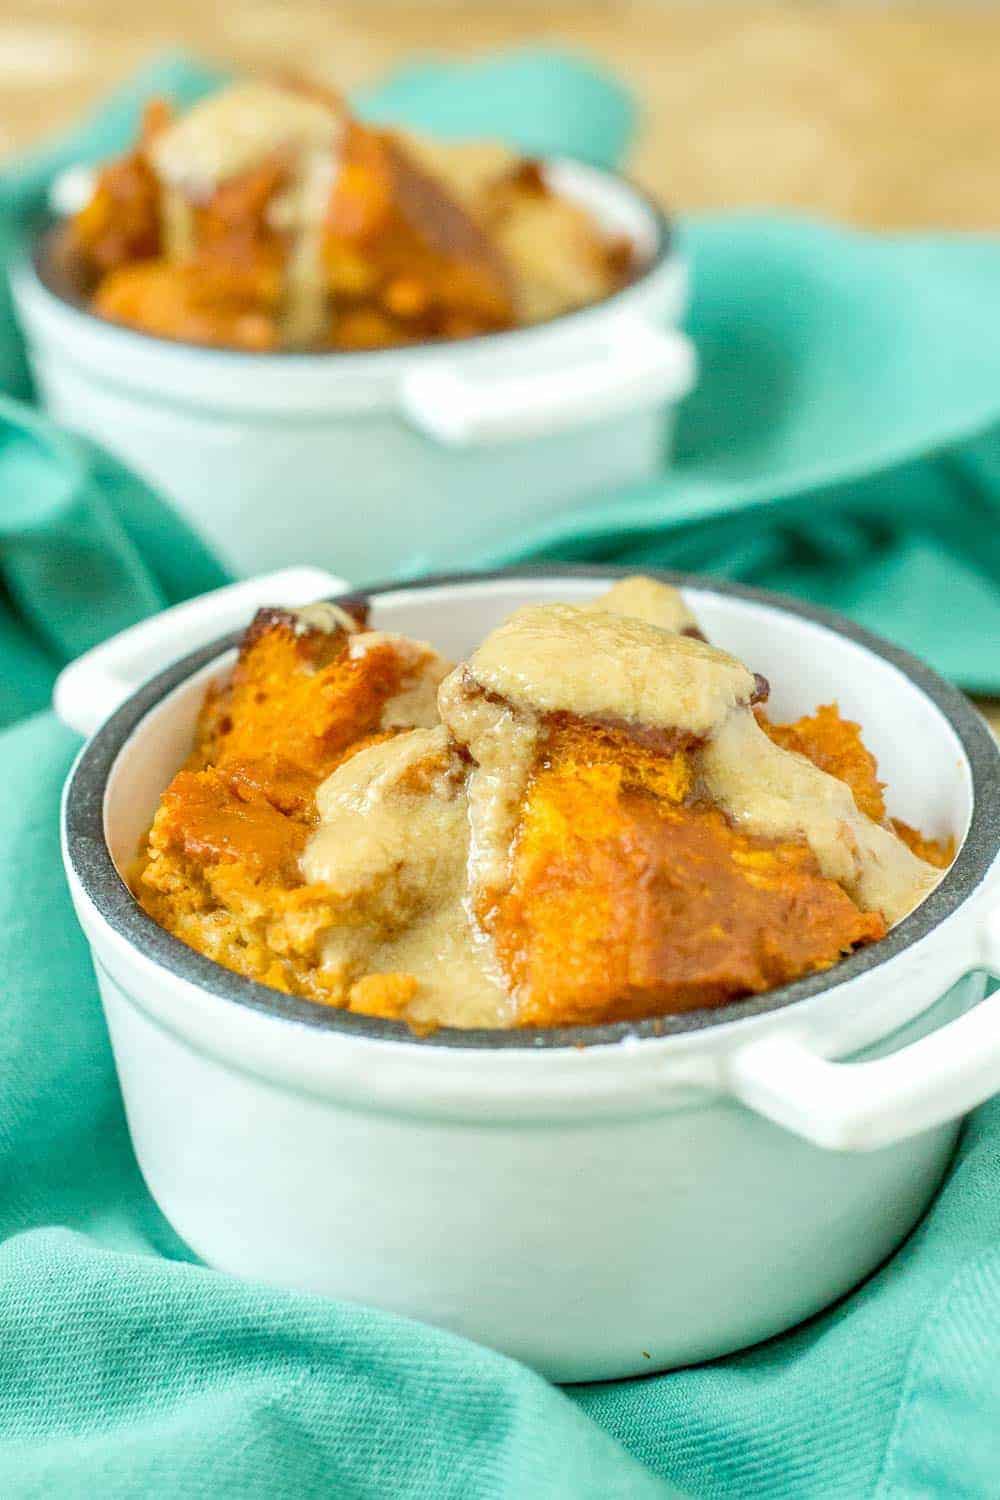 Pumpkin bread pudding is excellent for autumn nights.